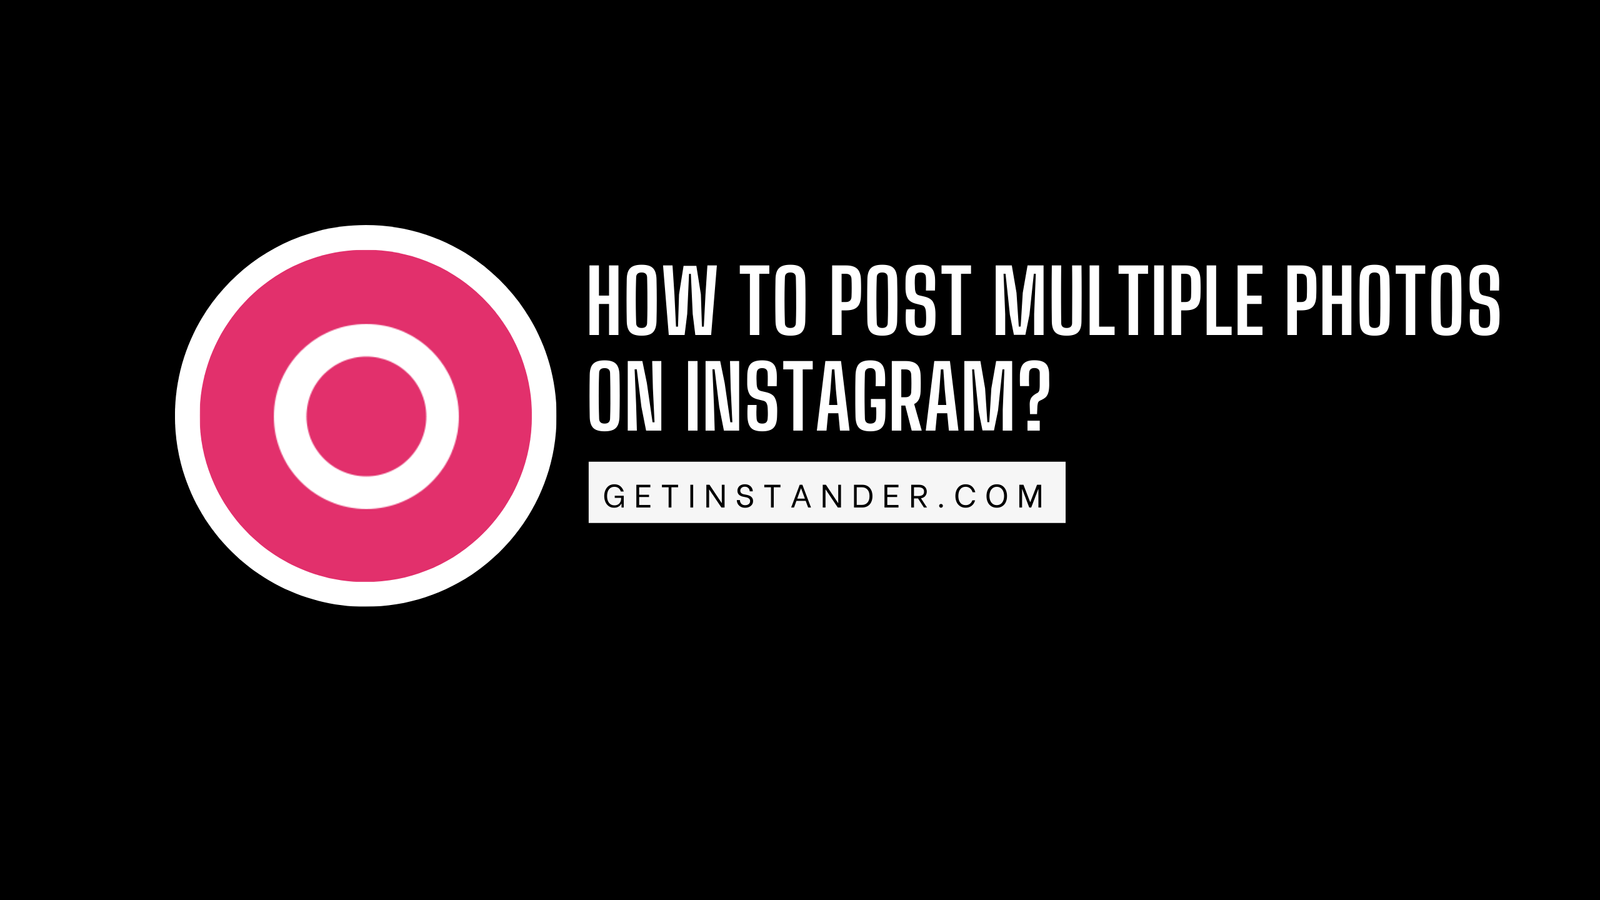 How To Post Multiple Photos On Instagram?